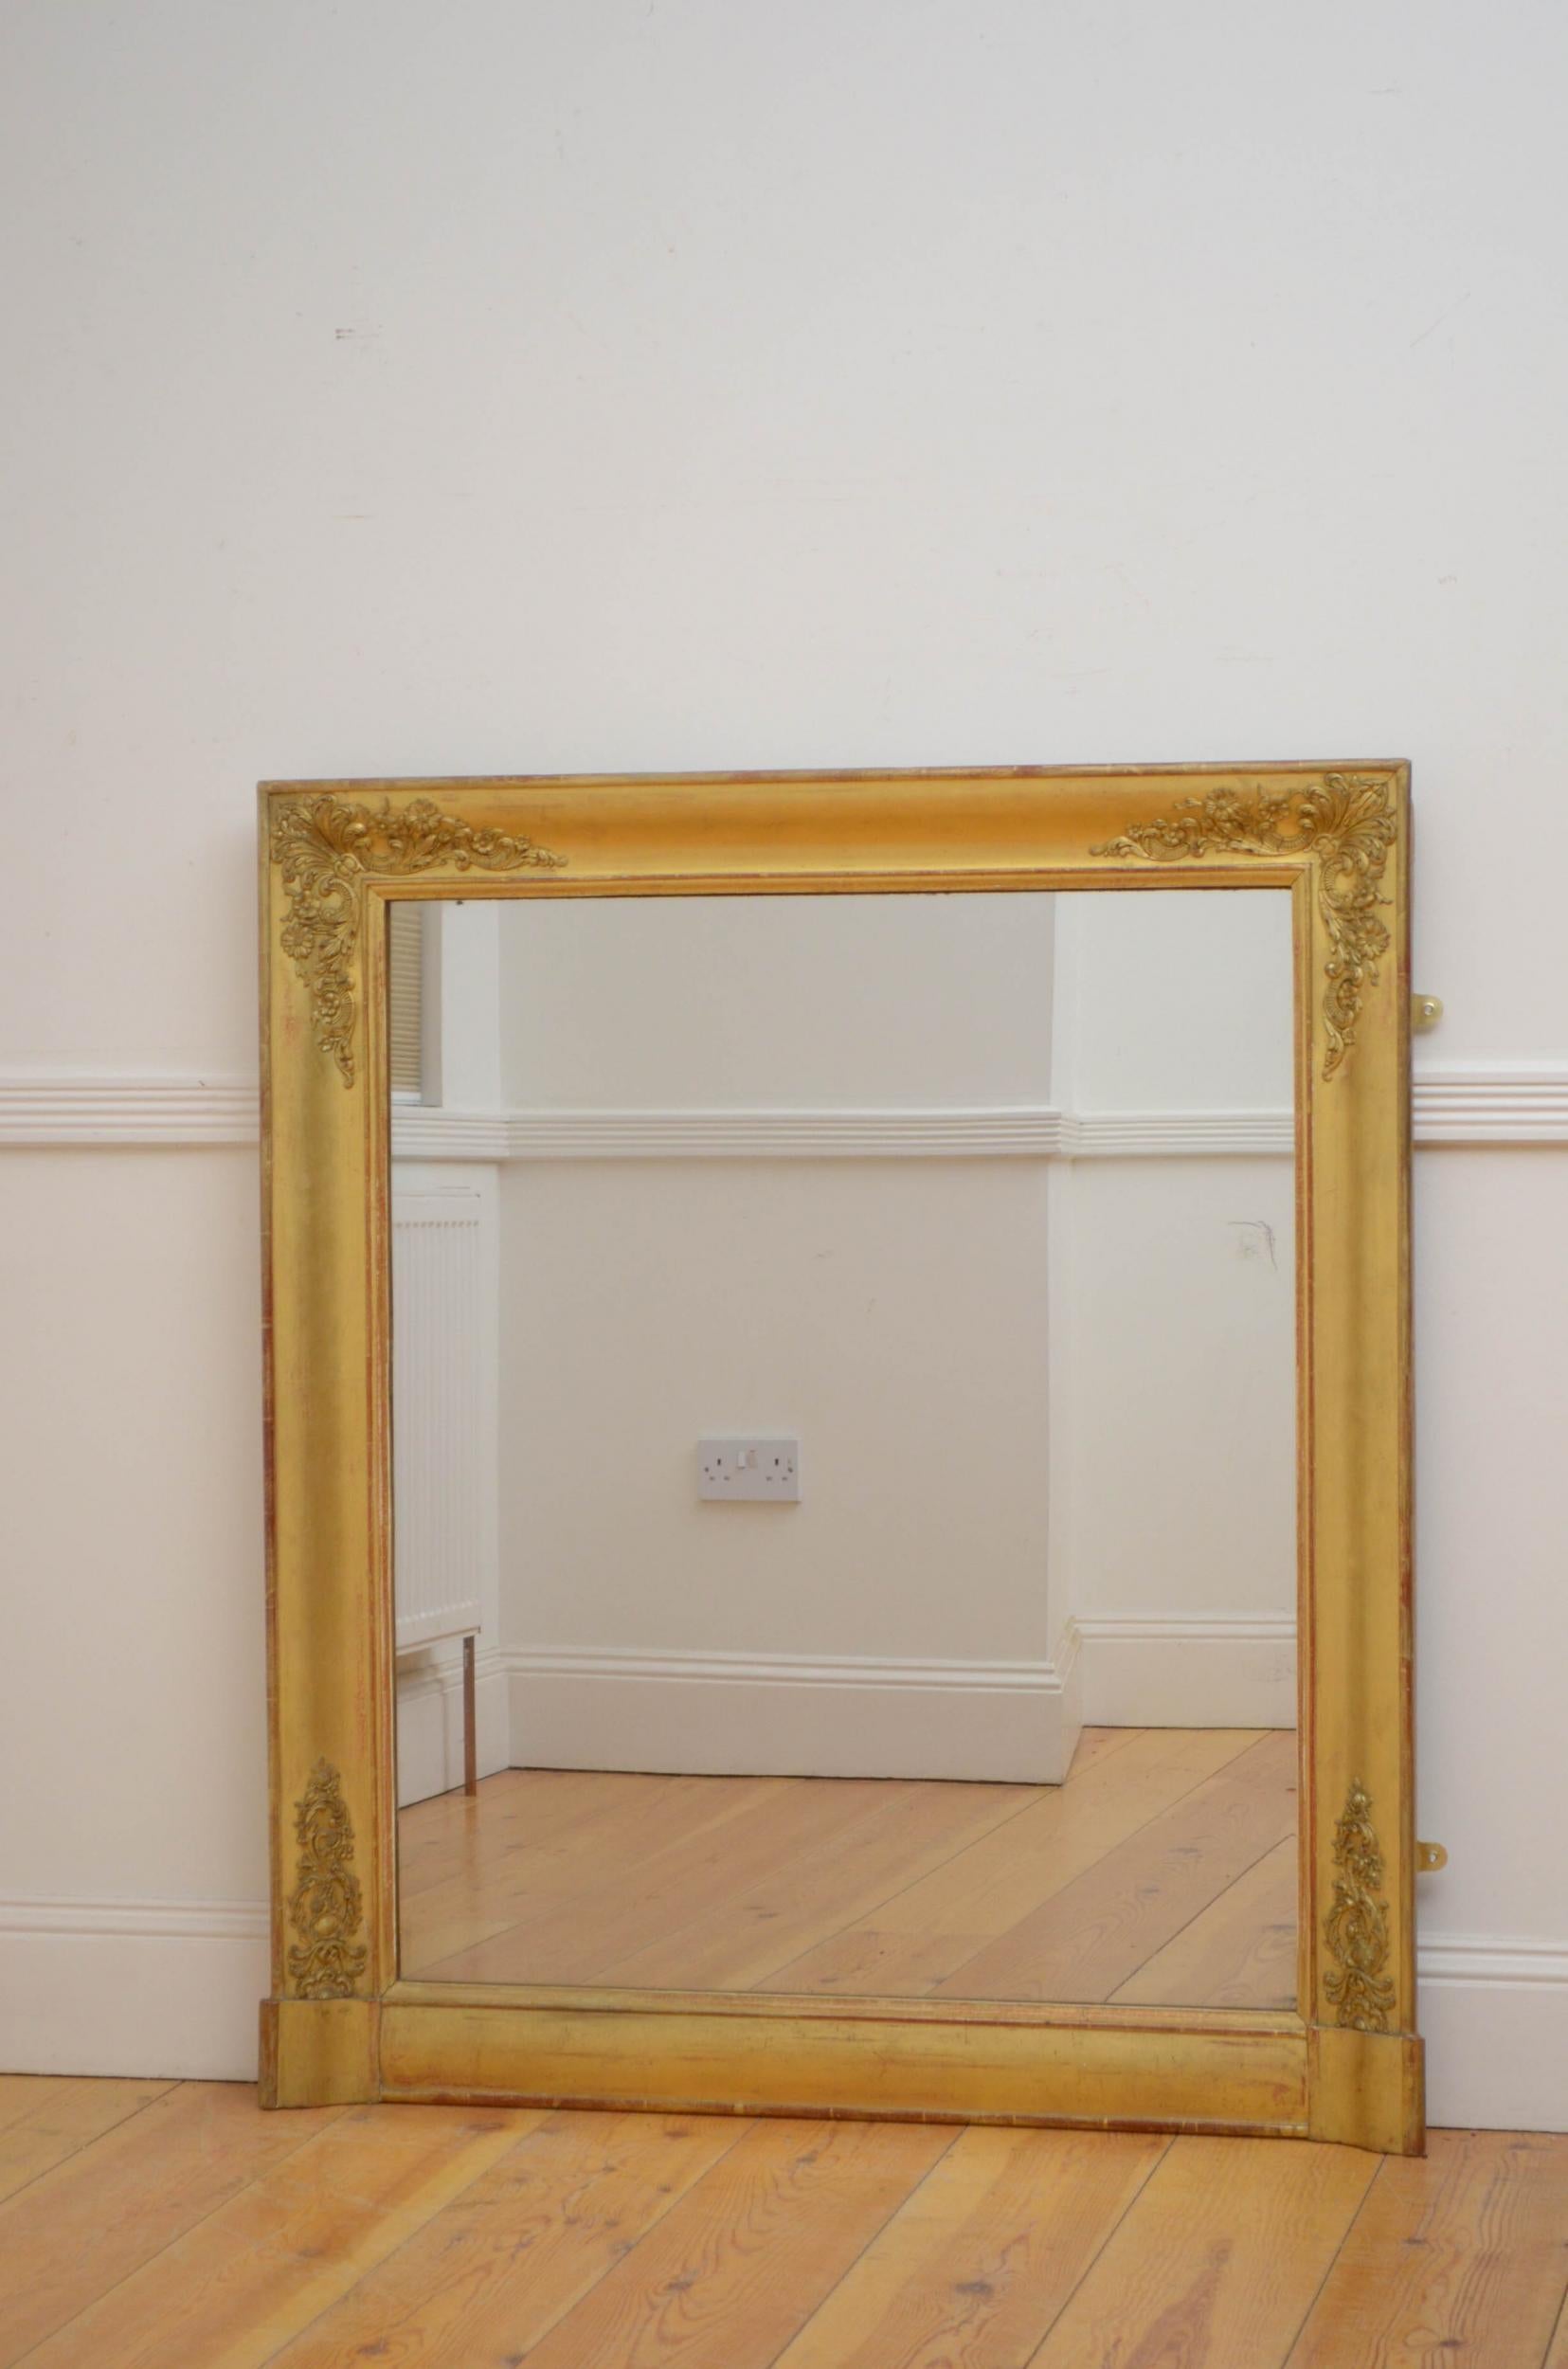 Sn5103 attractive French gilded wall mirror, having original glass with some foxing in moulded and gilded frame with foliage decoration to the corners. This antique mirror retains its original glass, original gilt and original backboards, all in